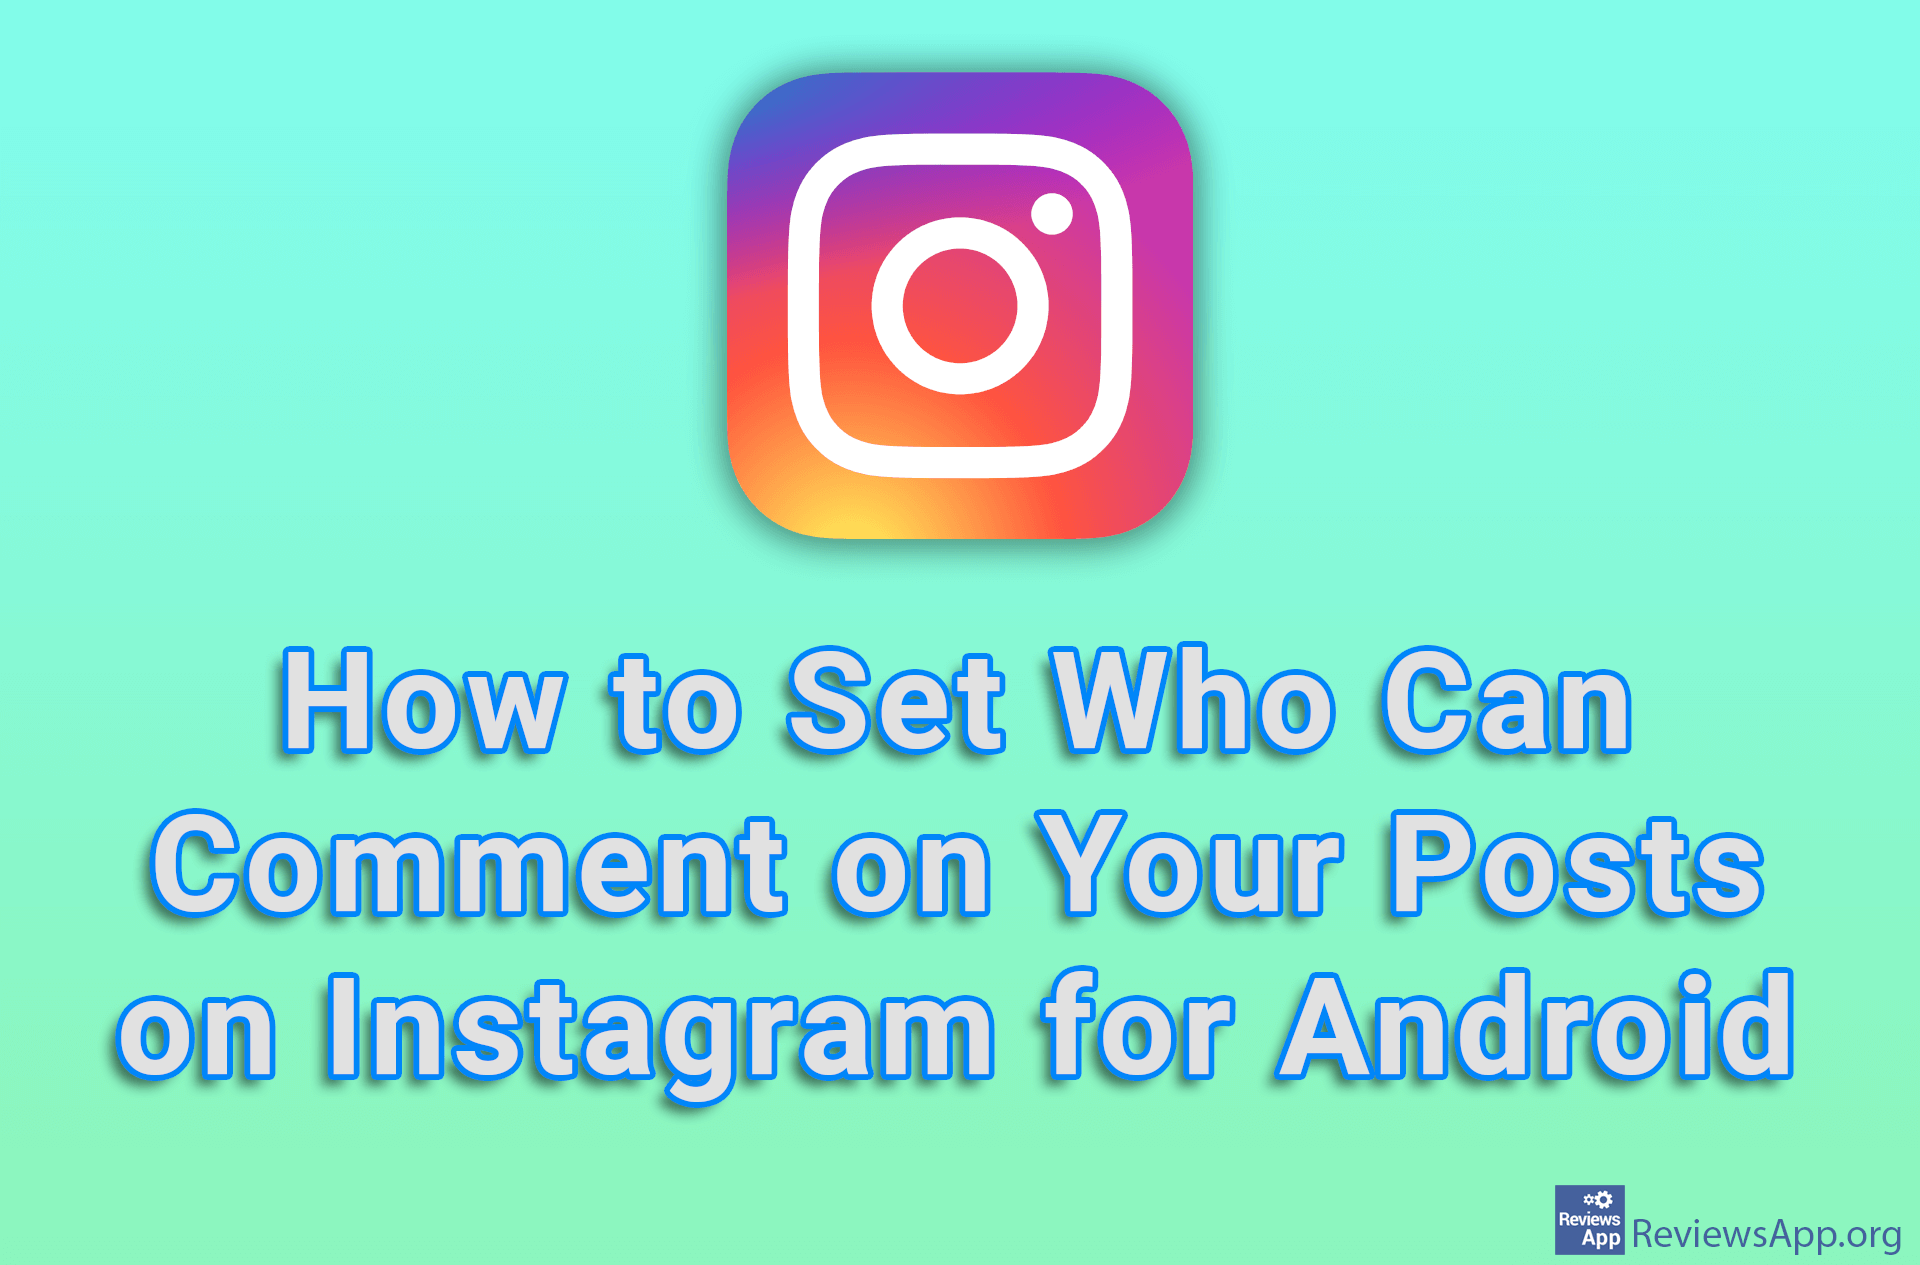 How to Set Who Can Comment on Your Posts on Instagram for Android